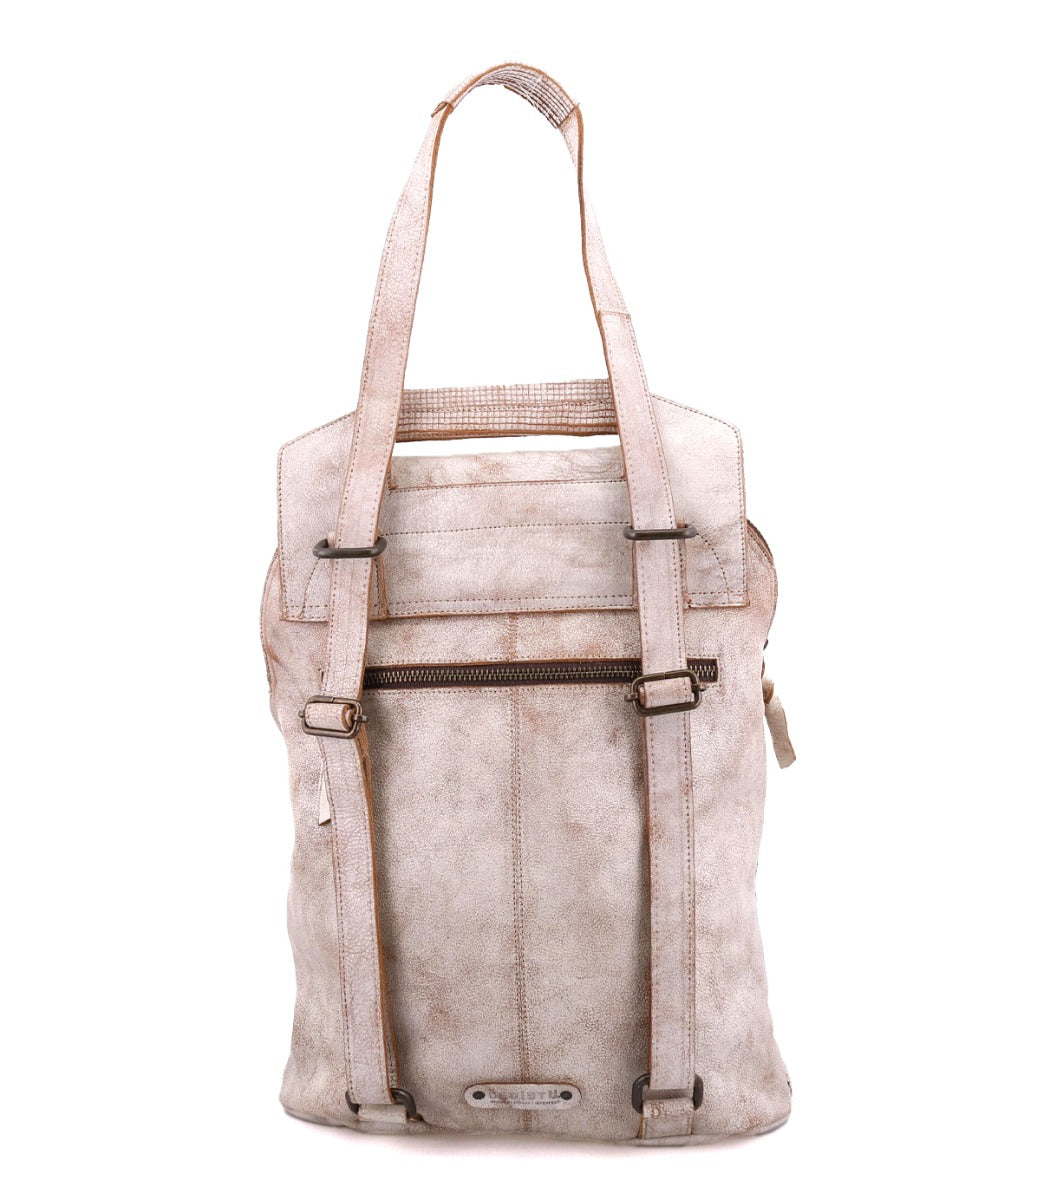 Bedstu 'Patsy' Tan Perforated Leather Backpack - Dudes Boutique